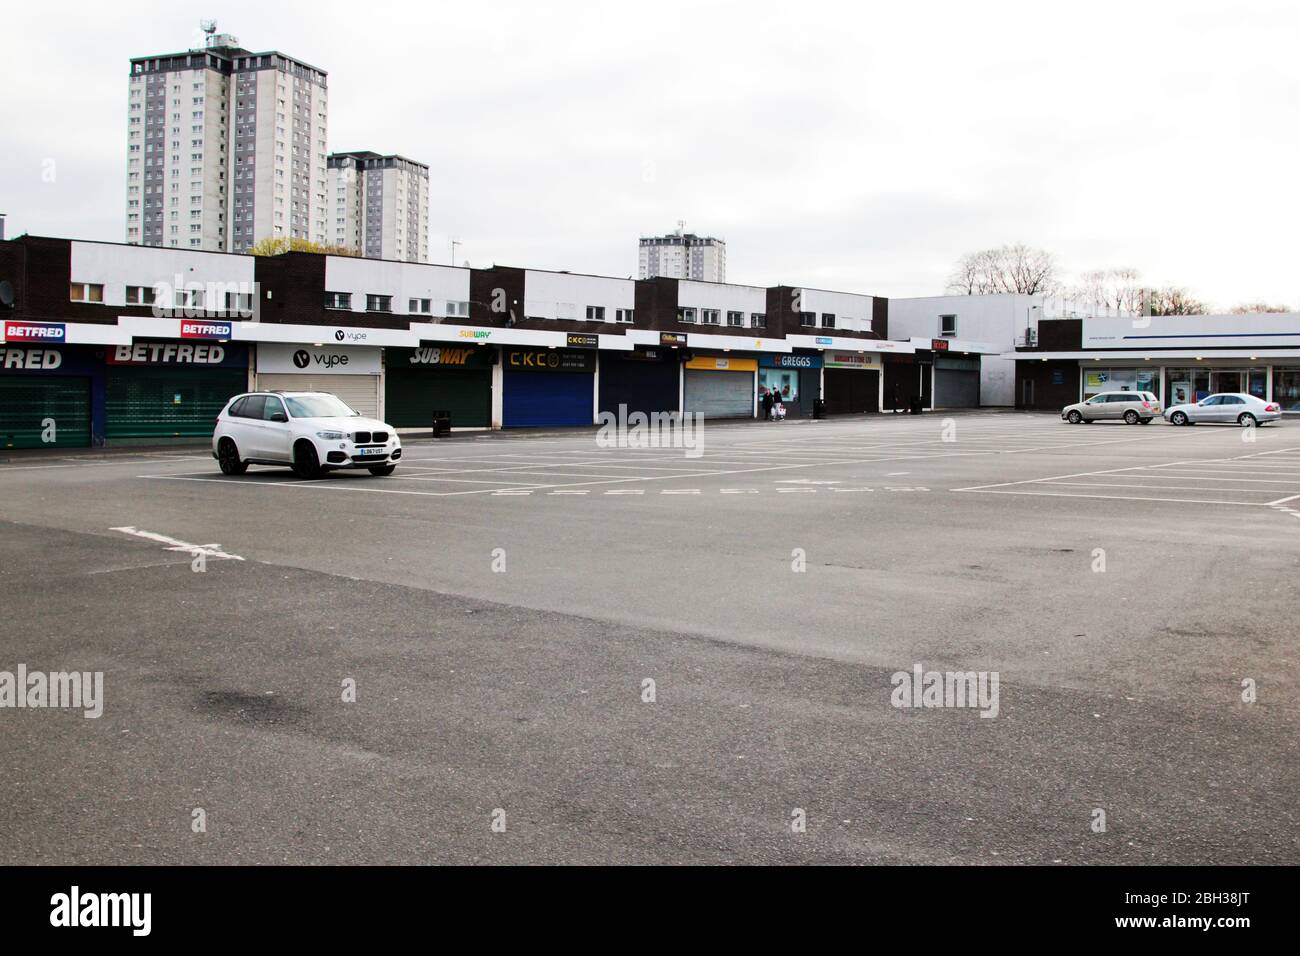 Very few cars in this retail park, in Glasgow, car park. It is almost deserted because of the lockdown caused by the Covid-19 and coronavirus pandemic that is seeping Britain. Normally it would be jam packed with cars. April 2020. ALAN WYLIE/ALAMY© Stock Photo